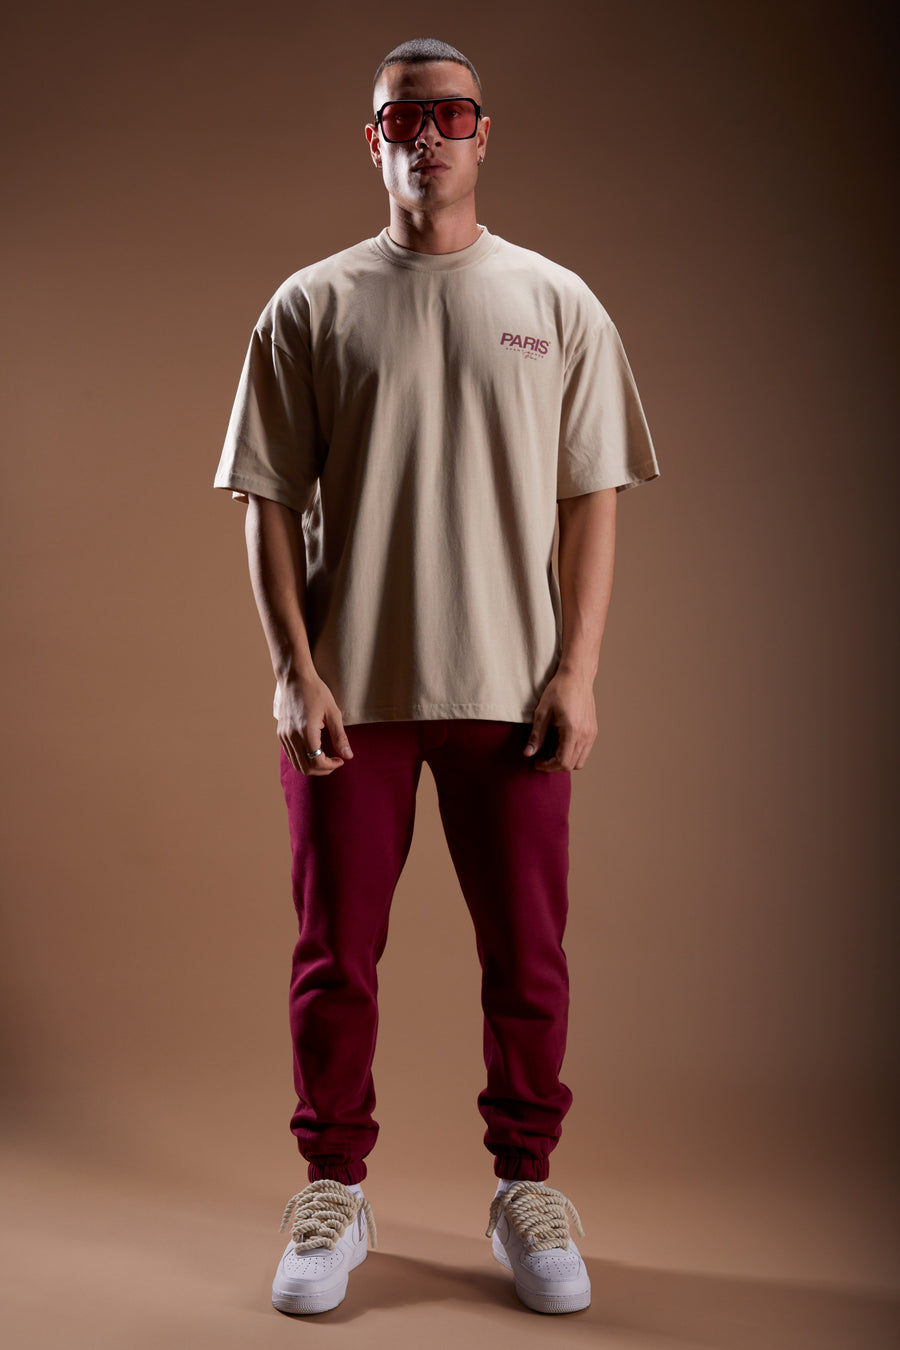 Taupe T-shirt and Burgundy Joggers